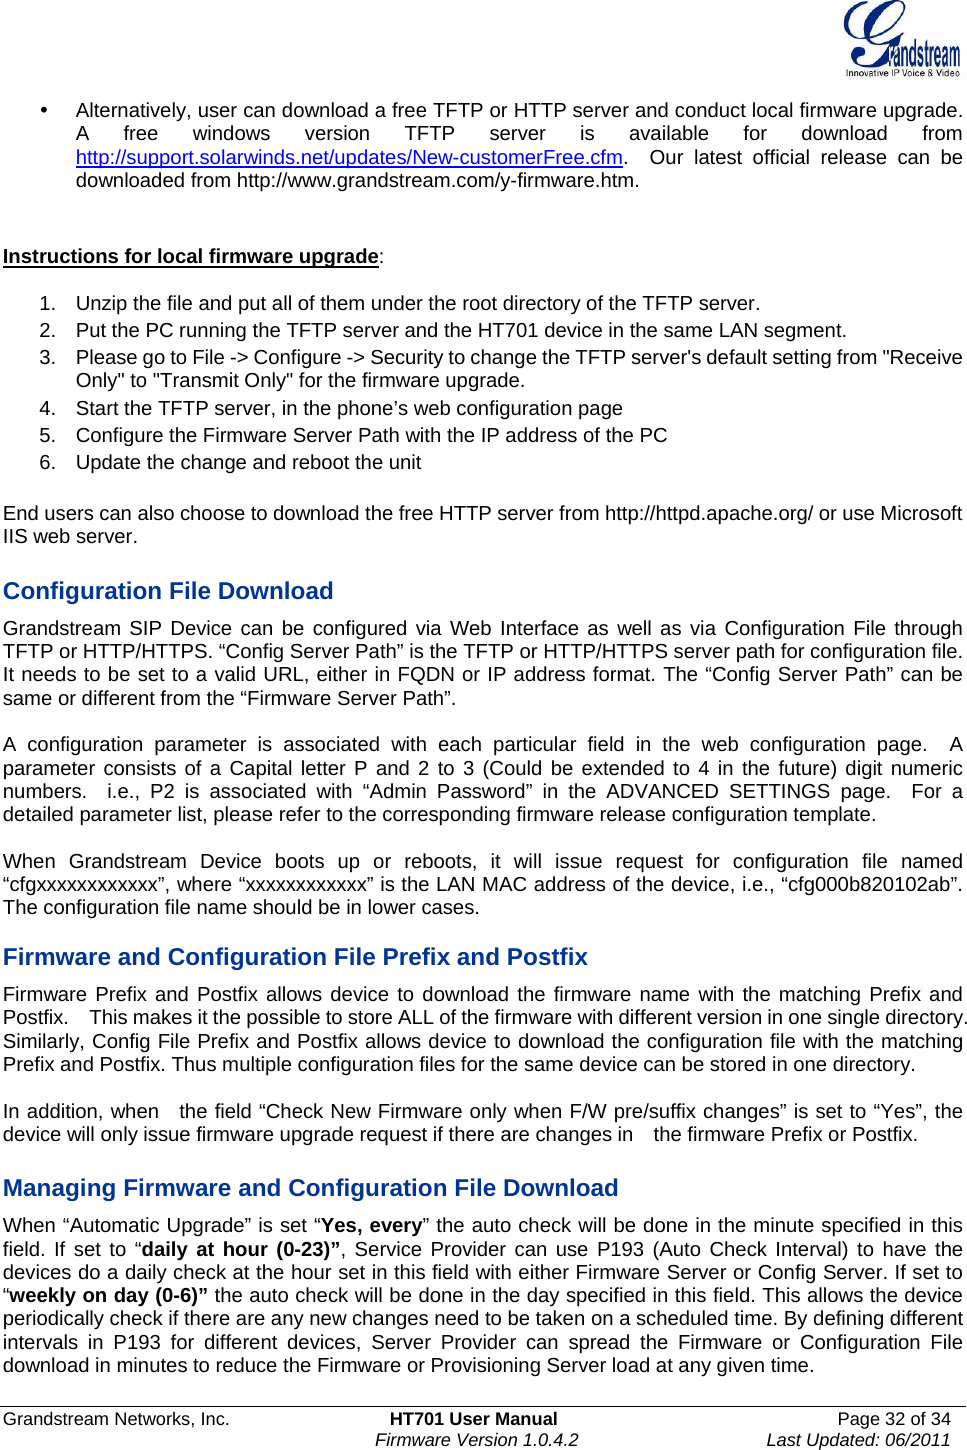  Grandstream Networks, Inc.  HT701 User Manual  Page 32 of 34     Firmware Version 1.0.4.2  Last Updated: 06/2011  y  Alternatively, user can download a free TFTP or HTTP server and conduct local firmware upgrade. A free windows version TFTP server is available for download from http://support.solarwinds.net/updates/New-customerFree.cfm.  Our latest official release can be downloaded from http://www.grandstream.com/y-firmware.htm.     Instructions for local firmware upgrade:  1.  Unzip the file and put all of them under the root directory of the TFTP server.   2.  Put the PC running the TFTP server and the HT701 device in the same LAN segment. 3.  Please go to File -&gt; Configure -&gt; Security to change the TFTP server&apos;s default setting from &quot;Receive Only&quot; to &quot;Transmit Only&quot; for the firmware upgrade.   4.  Start the TFTP server, in the phone’s web configuration page 5.  Configure the Firmware Server Path with the IP address of the PC 6.  Update the change and reboot the unit    End users can also choose to download the free HTTP server from http://httpd.apache.org/ or use Microsoft IIS web server.  Configuration File Download Grandstream SIP Device can be configured via Web Interface as well as via Configuration File through TFTP or HTTP/HTTPS. “Config Server Path” is the TFTP or HTTP/HTTPS server path for configuration file. It needs to be set to a valid URL, either in FQDN or IP address format. The “Config Server Path” can be same or different from the “Firmware Server Path”.  A configuration parameter is associated with each particular field in the web configuration page.  A parameter consists of a Capital letter P and 2 to 3 (Could be extended to 4 in the future) digit numeric numbers.  i.e., P2 is associated with “Admin Password” in the ADVANCED SETTINGS page.  For a detailed parameter list, please refer to the corresponding firmware release configuration template.   When Grandstream Device boots up or reboots, it will issue request for configuration file named “cfgxxxxxxxxxxxx”, where “xxxxxxxxxxxx” is the LAN MAC address of the device, i.e., “cfg000b820102ab”. The configuration file name should be in lower cases.  Firmware and Configuration File Prefix and Postfix Firmware Prefix and Postfix allows device to download the firmware name with the matching Prefix and Postfix.    This makes it the possible to store ALL of the firmware with different version in one single directory.   Similarly, Config File Prefix and Postfix allows device to download the configuration file with the matching Prefix and Postfix. Thus multiple configuration files for the same device can be stored in one directory.  In addition, when    the field “Check New Firmware only when F/W pre/suffix changes” is set to “Yes”, the device will only issue firmware upgrade request if there are changes in    the firmware Prefix or Postfix.  Managing Firmware and Configuration File Download   When “Automatic Upgrade” is set “Yes, every” the auto check will be done in the minute specified in this field. If set to “daily at hour (0-23)”, Service Provider can use P193 (Auto Check Interval) to have the devices do a daily check at the hour set in this field with either Firmware Server or Config Server. If set to “weekly on day (0-6)” the auto check will be done in the day specified in this field. This allows the device periodically check if there are any new changes need to be taken on a scheduled time. By defining different intervals in P193 for different devices, Server Provider can spread the Firmware or Configuration File download in minutes to reduce the Firmware or Provisioning Server load at any given time.  